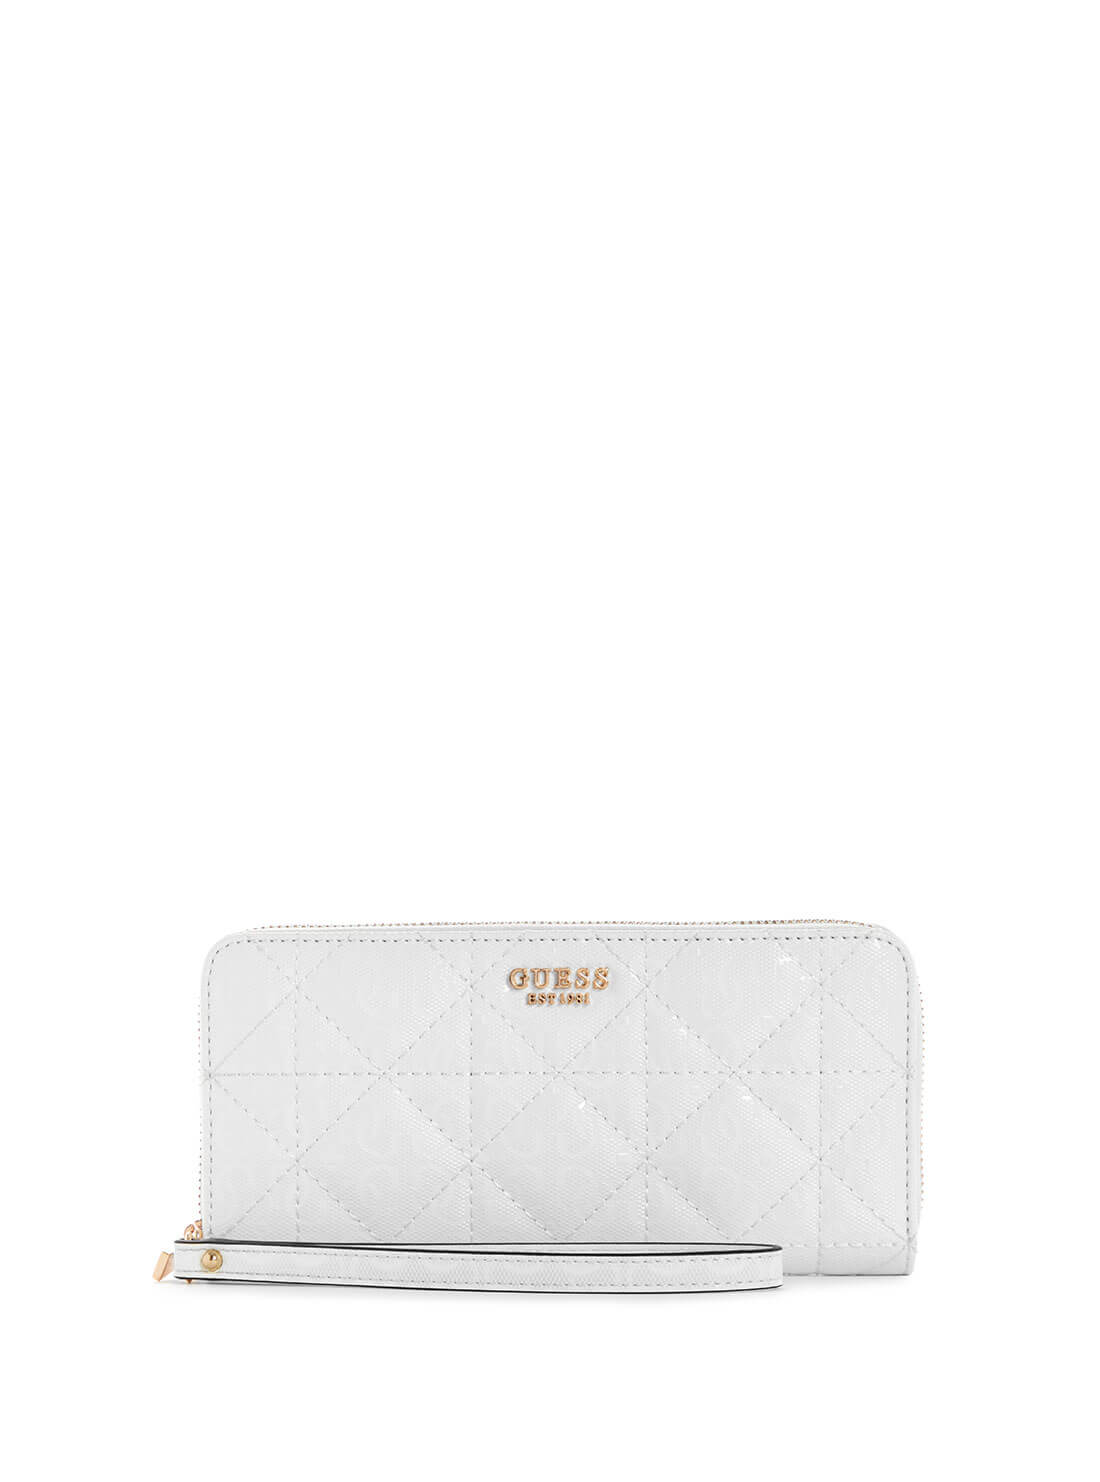 GUESS Womens White Malia Large Wallet GG848846 Front View